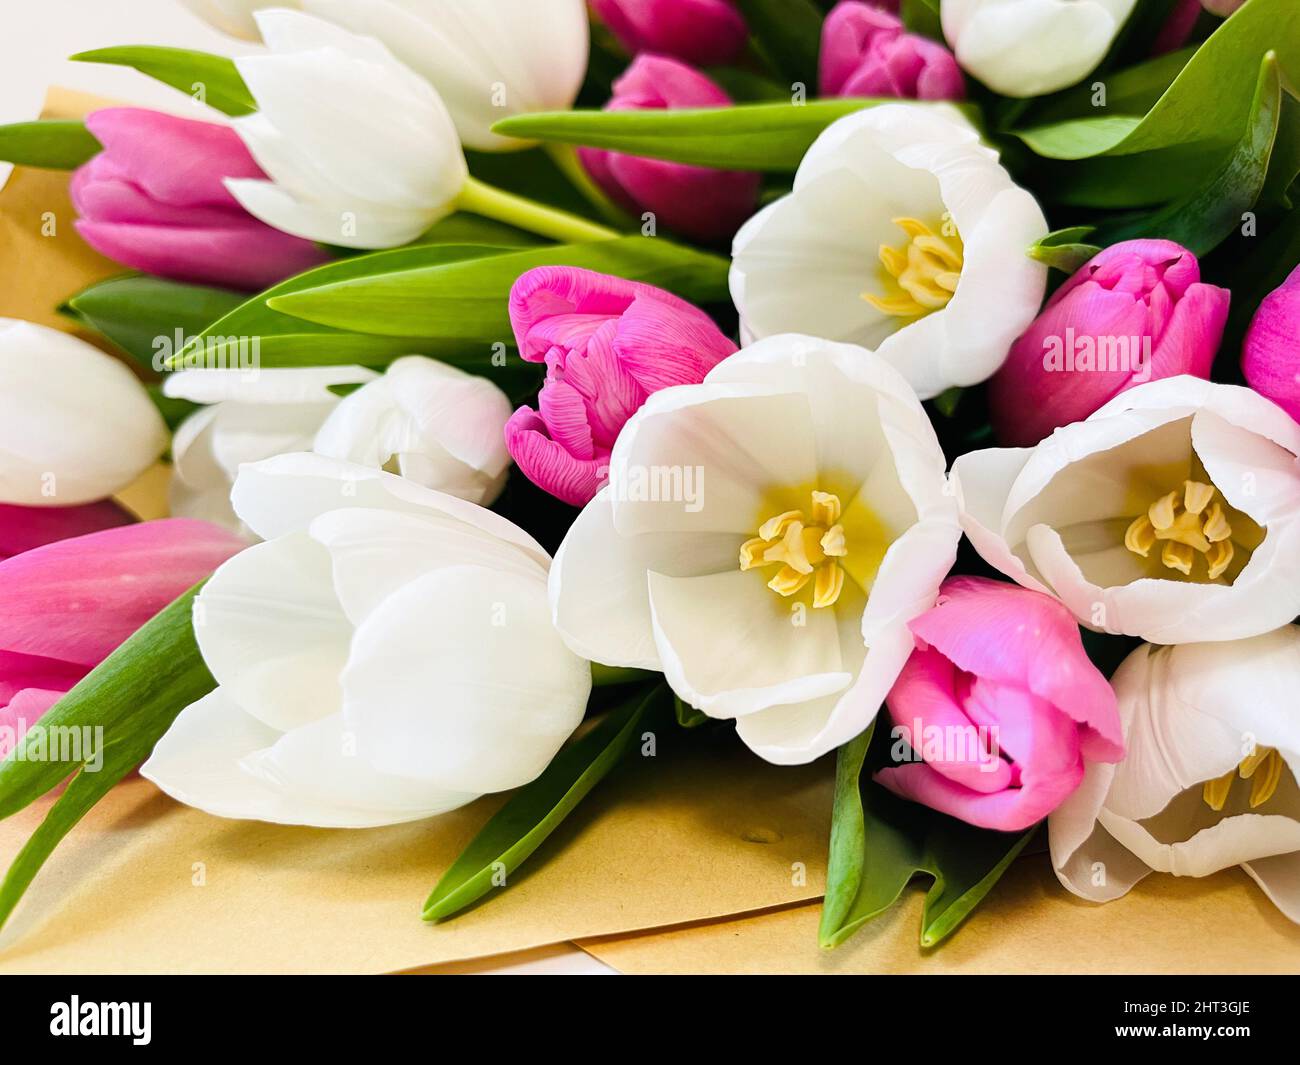 White and pink tulips. A spring blurring background with bright tulips Stock Photo